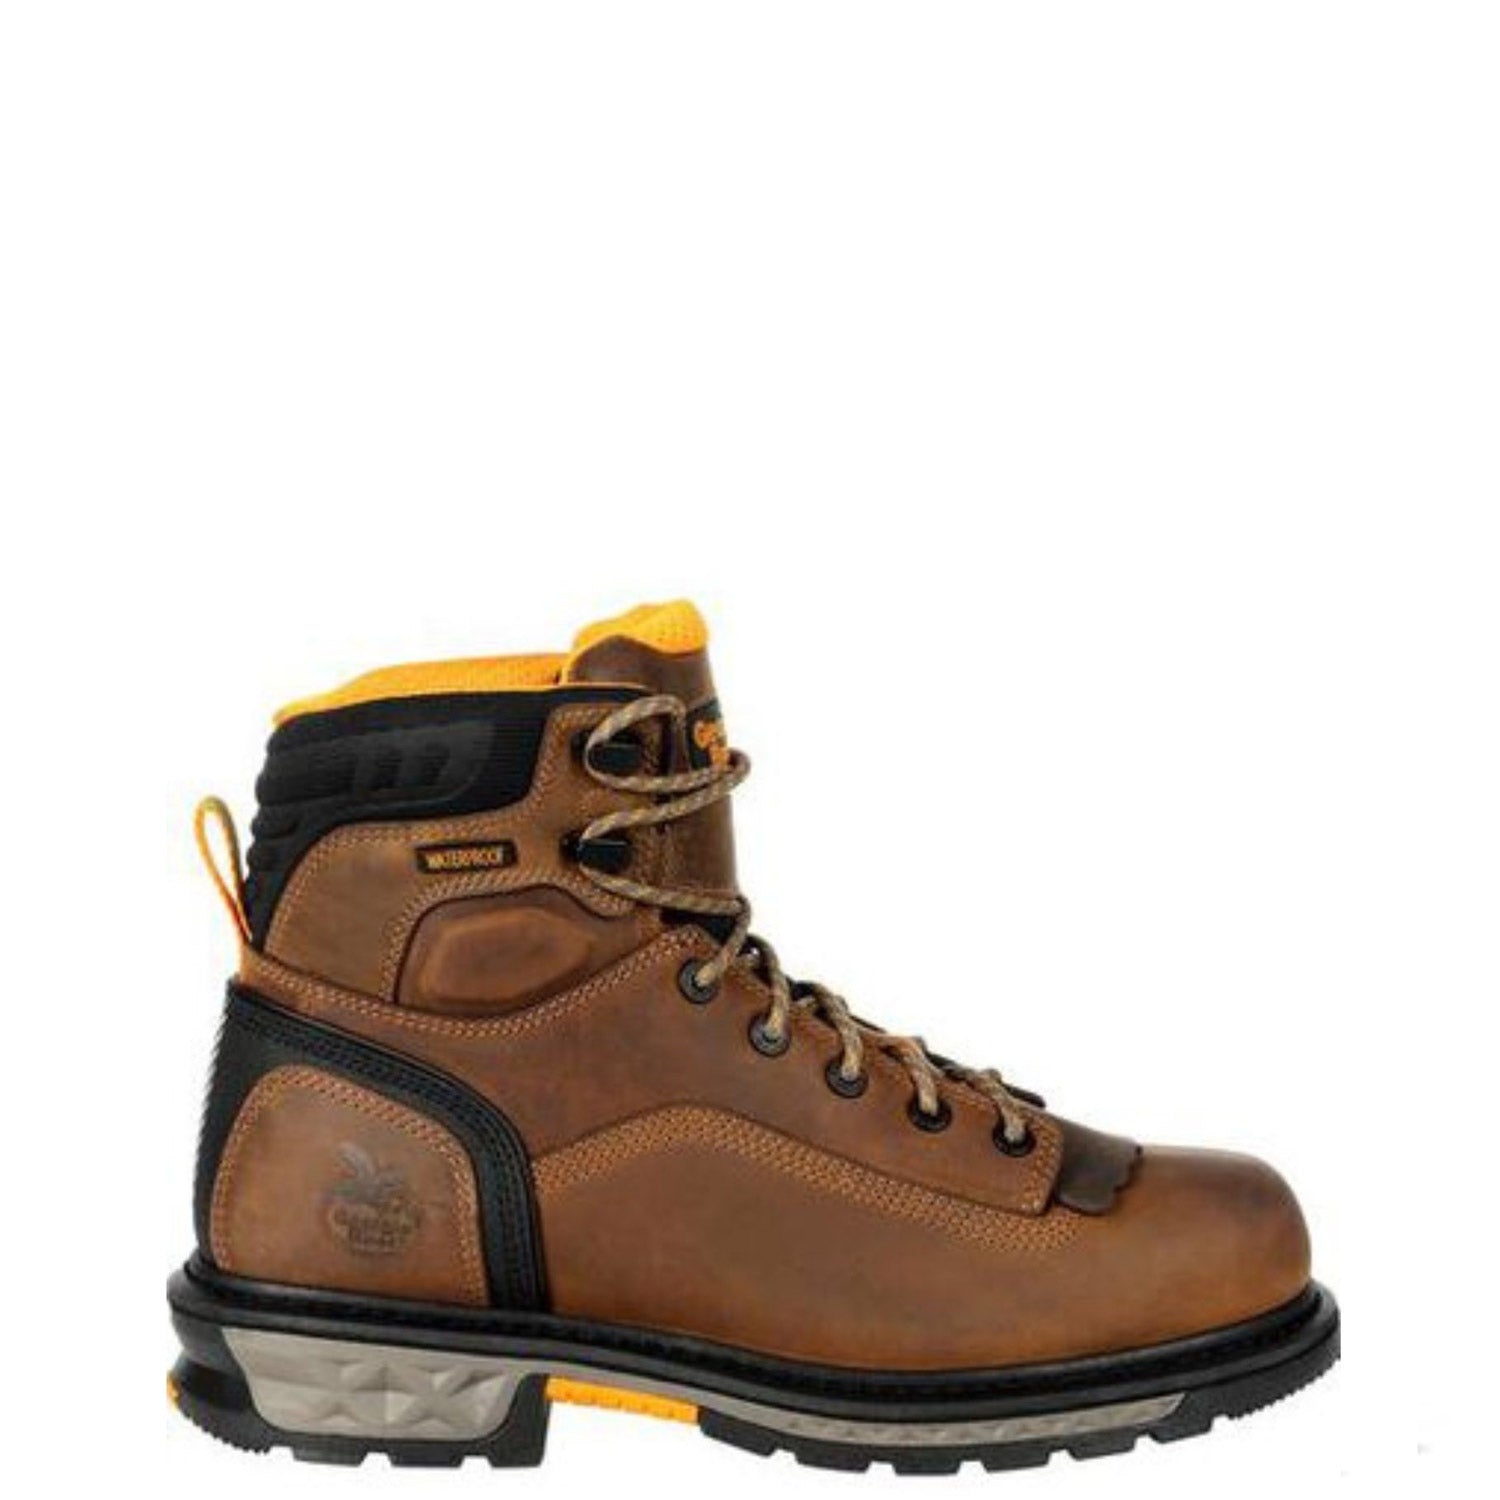 Georgia Boot Men's Carbo-Tec LTX 6" Waterproof EH Comp Toe Work Boot - Work World - Workwear, Work Boots, Safety Gear